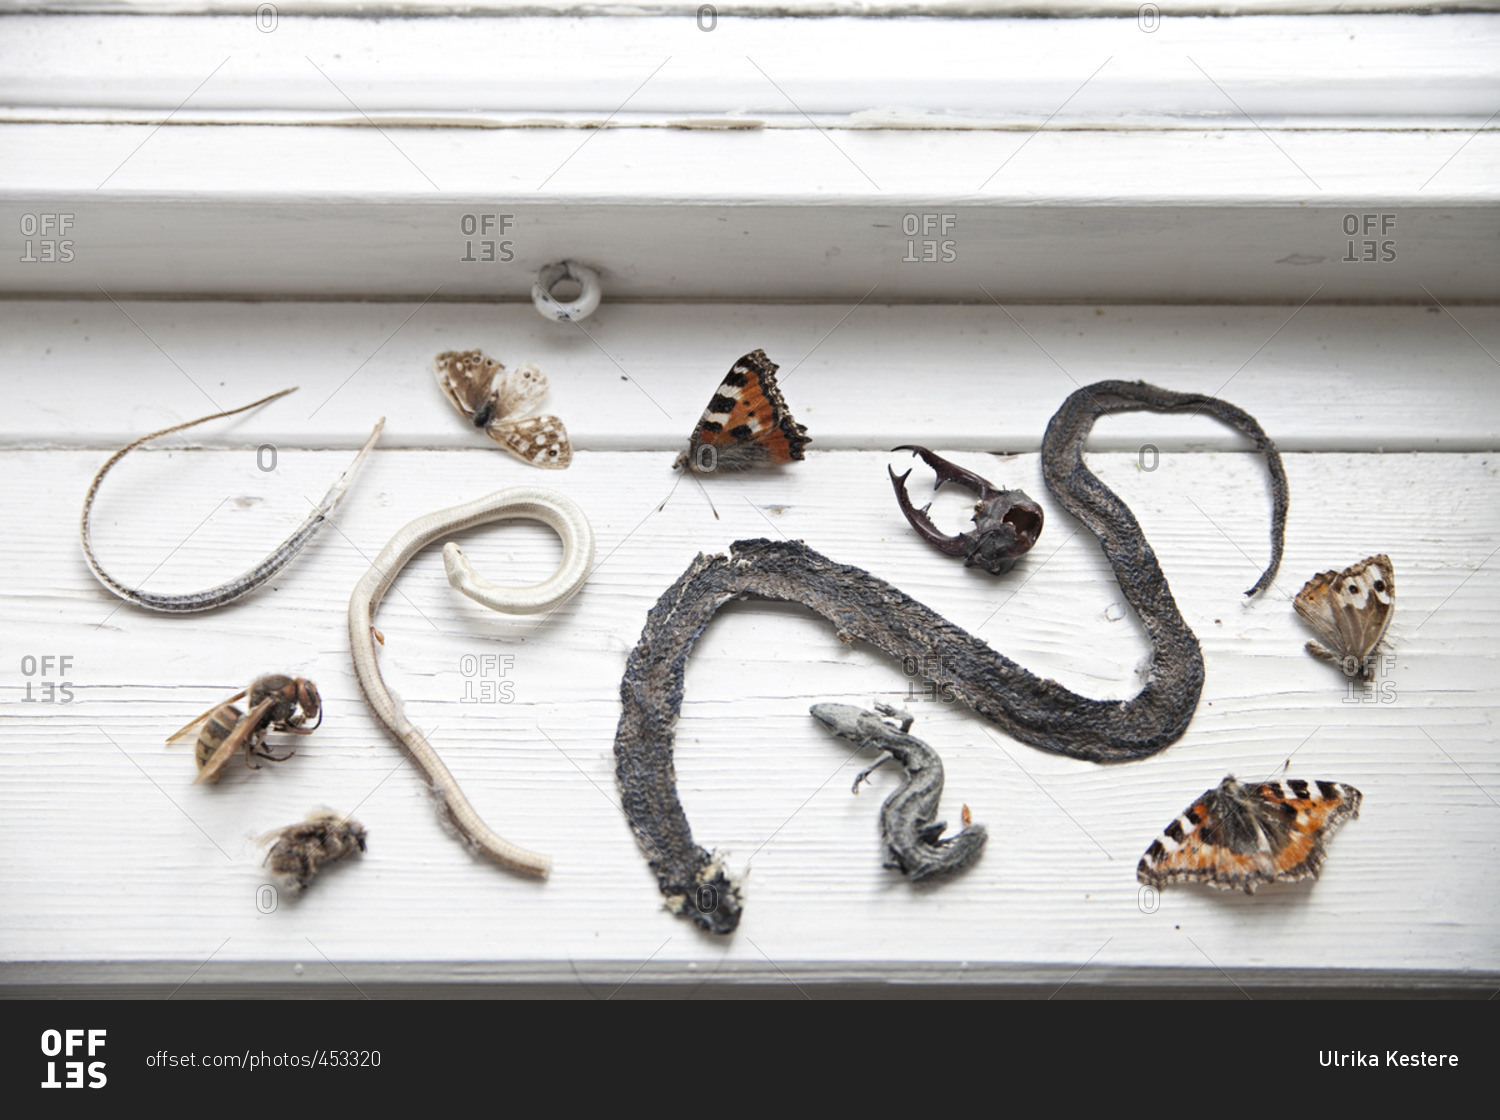 Dried insects and snake skins displayed on windowsill